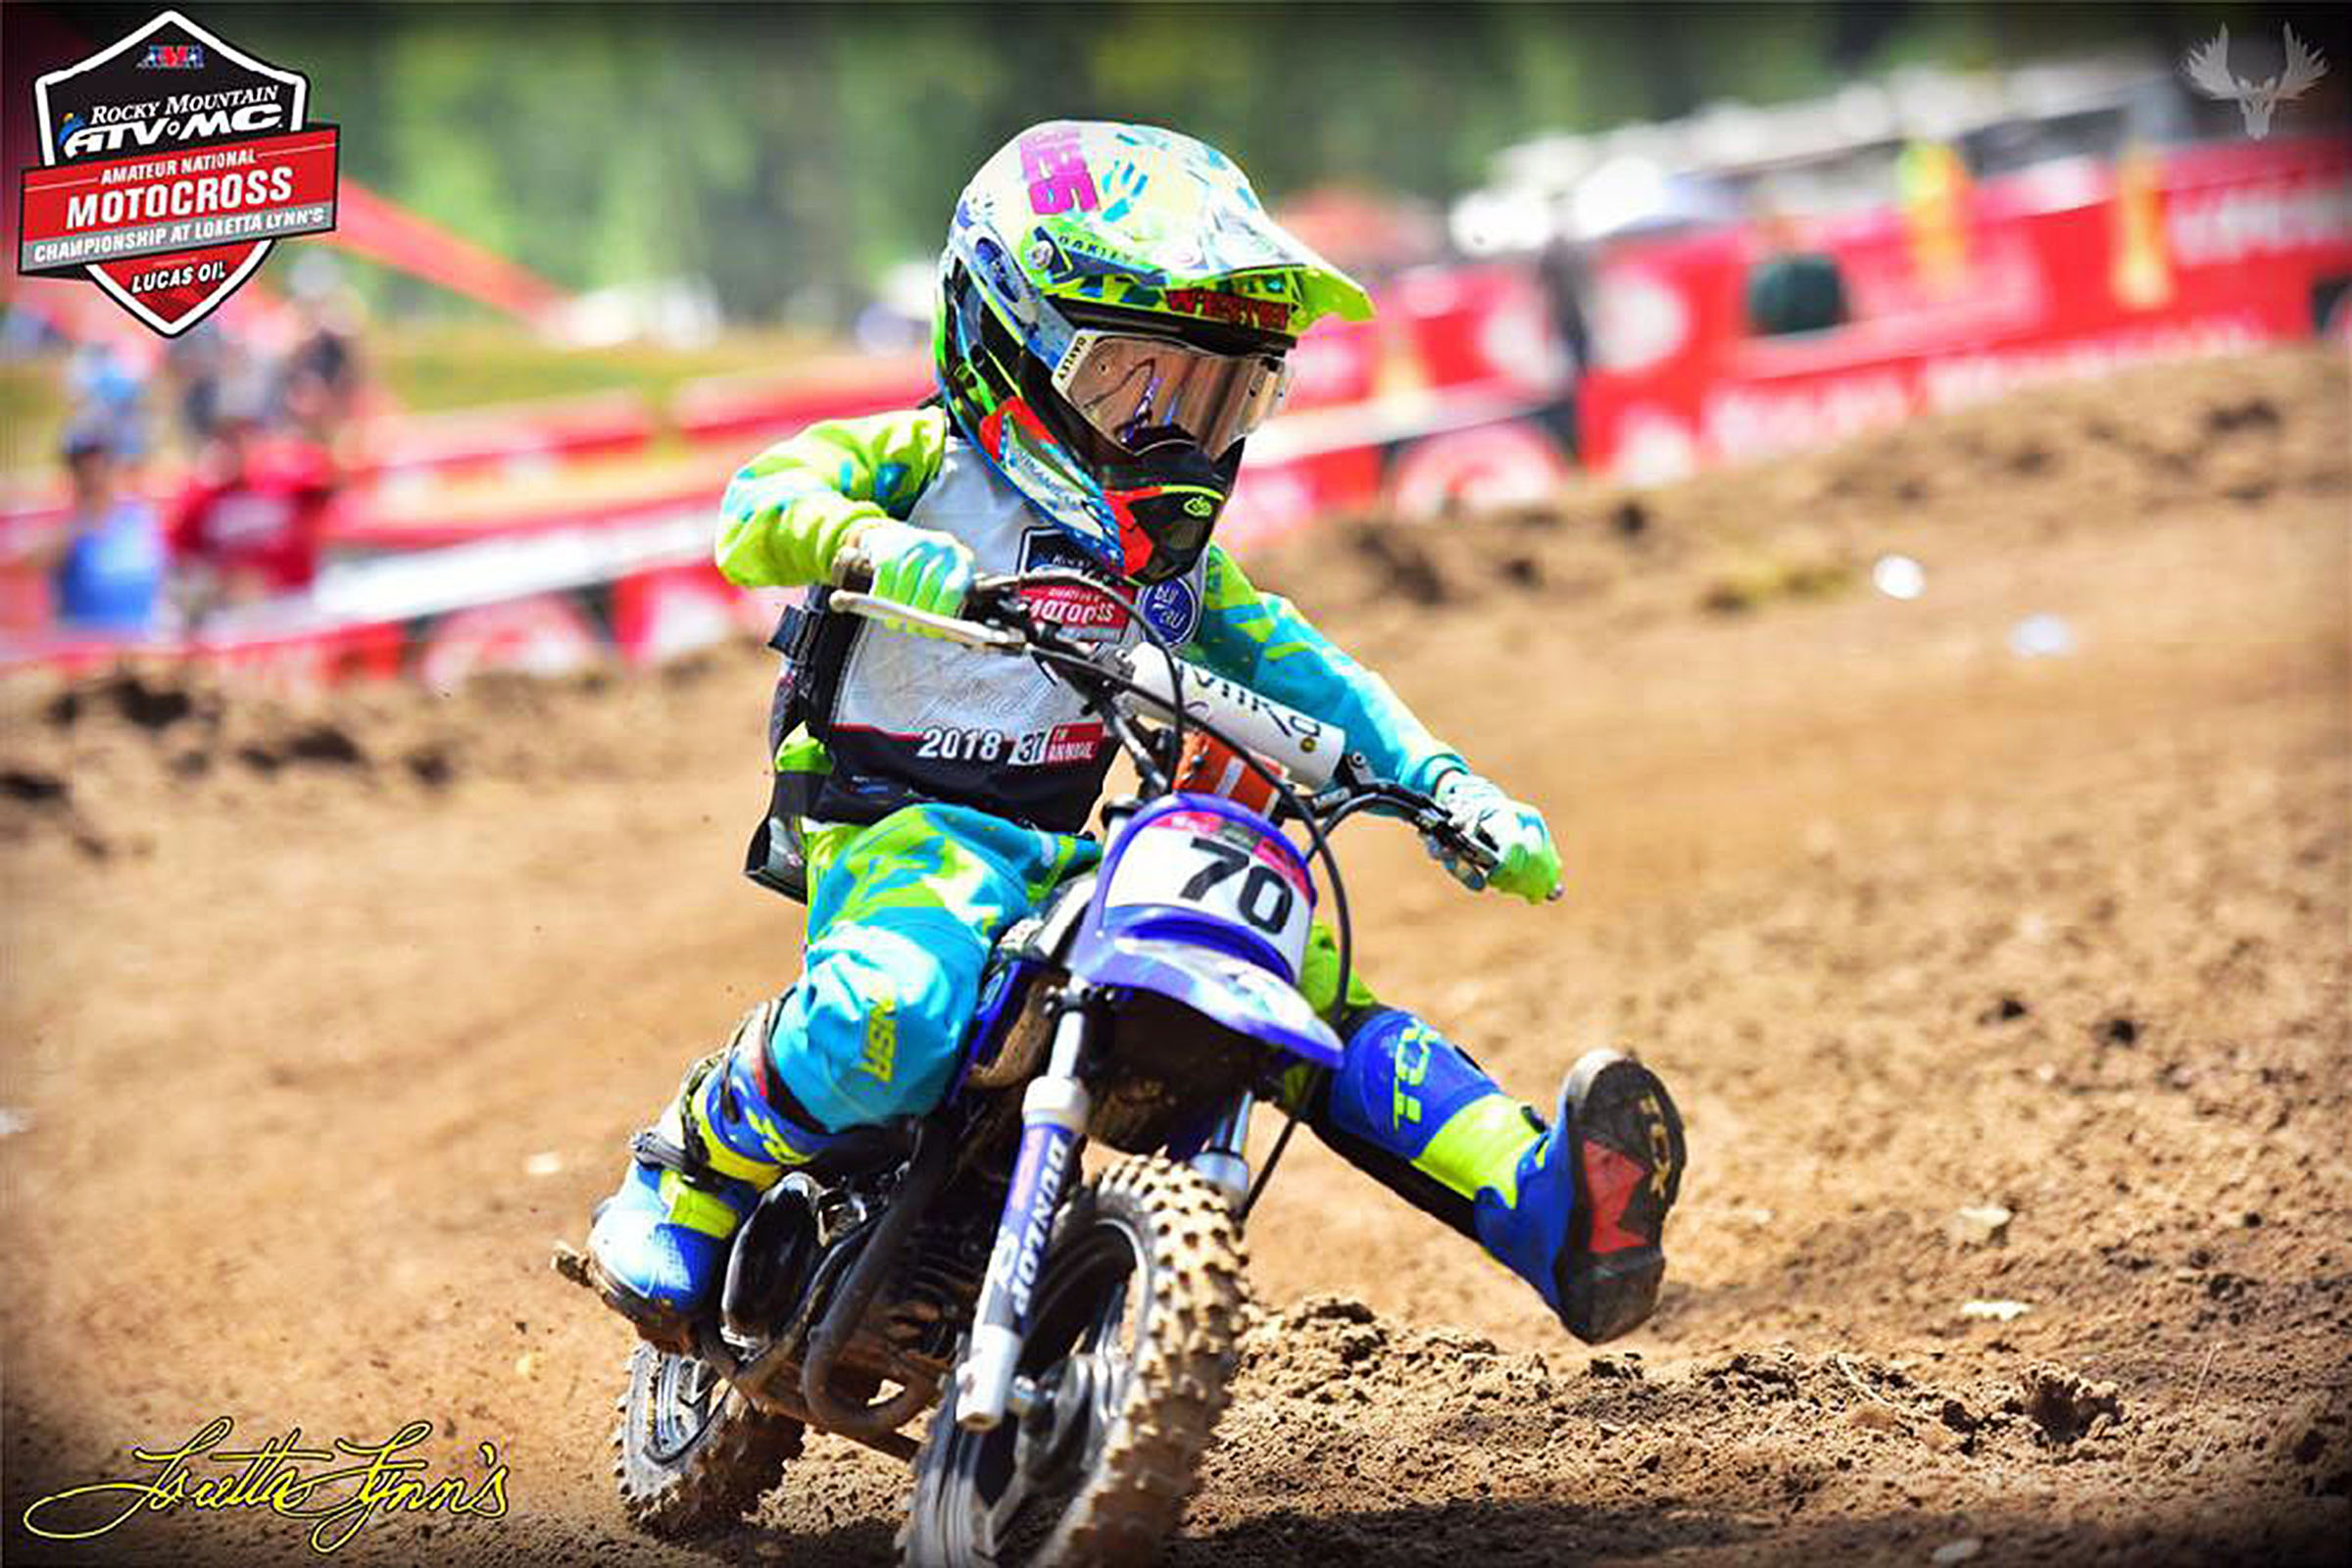 The motocross kid 7-year-old Arkansan is dirt bike champion in the making